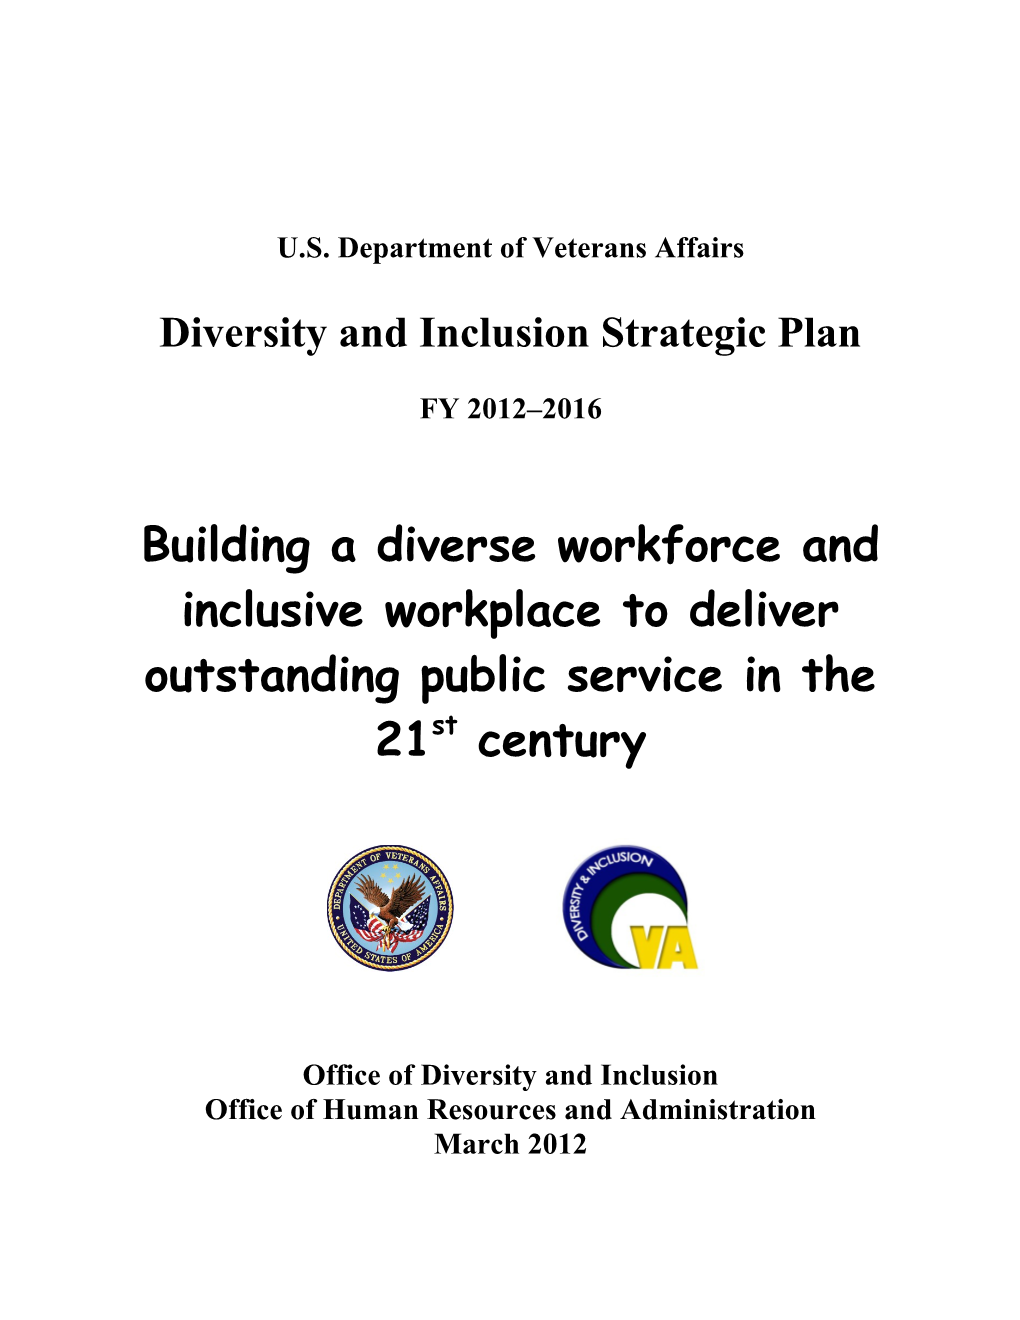 Diversity and Inclusion Strategic Plan